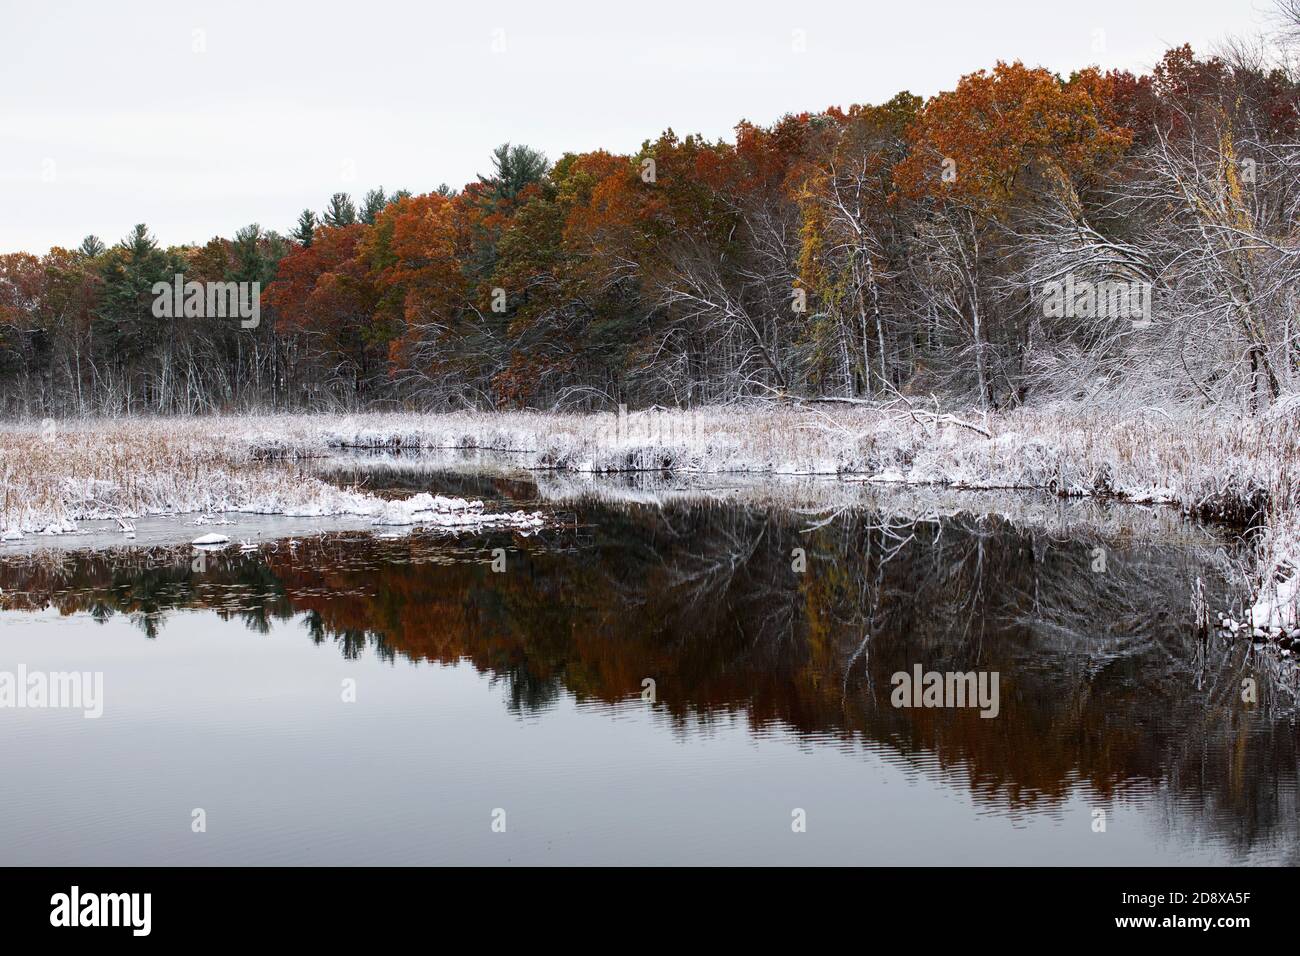 October snow on the autumn leaves at Forge Pond in Westford, Massachusetts, USA. Stock Photo